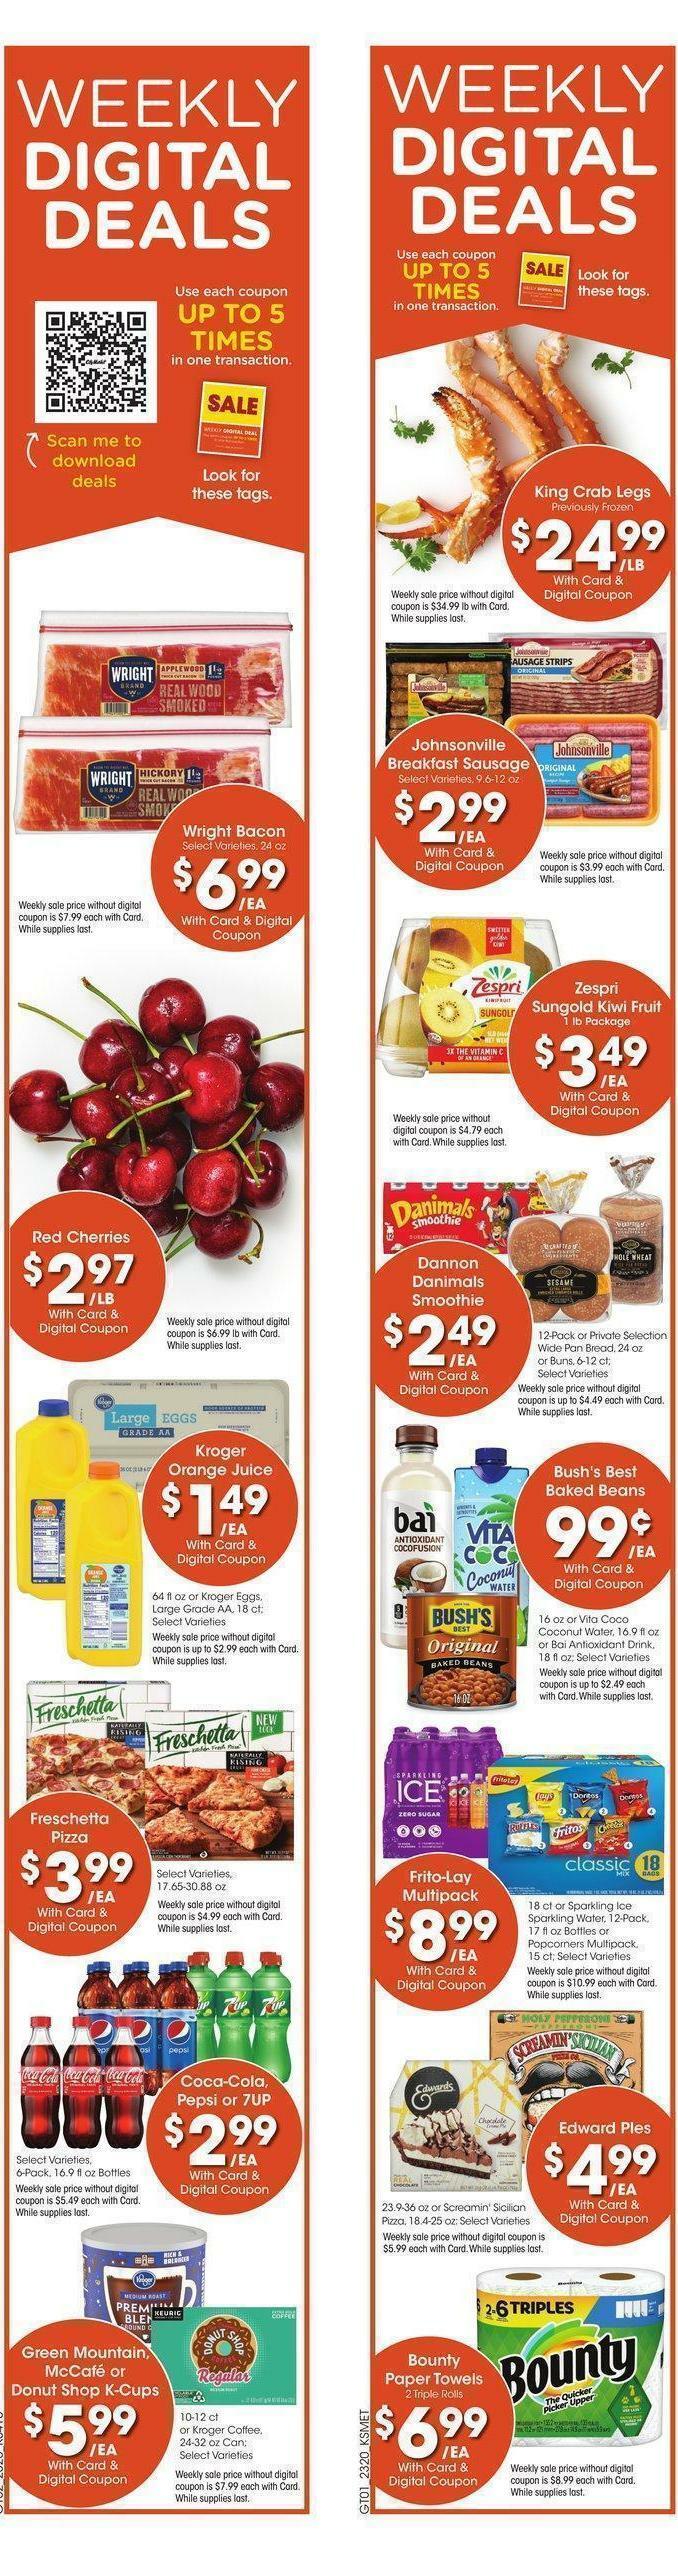 City Market Weekly Ad from June 14